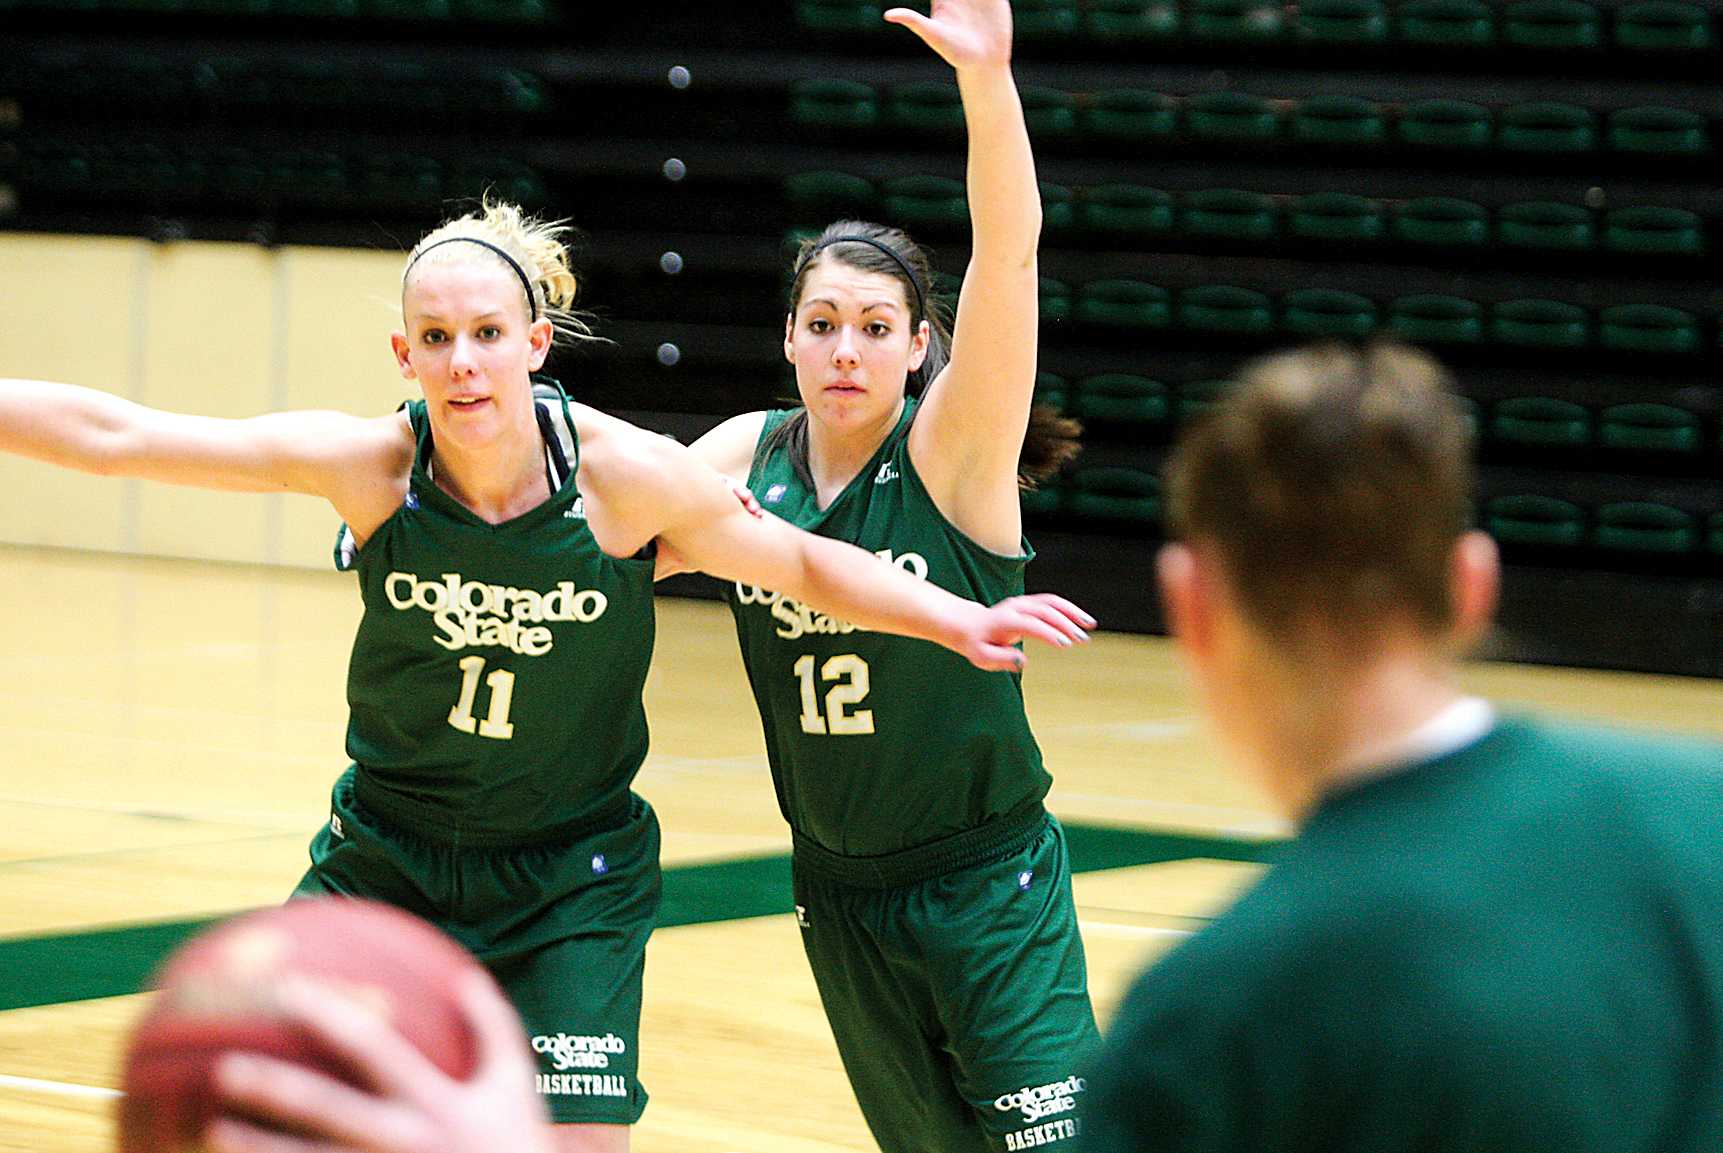 Sam Martin (12) defends Meghan Heimstra (11) at practice on Monday in Moby Arena. The Rams prepare to take on Nevada in Moby Arena at 7 Wednesday night.